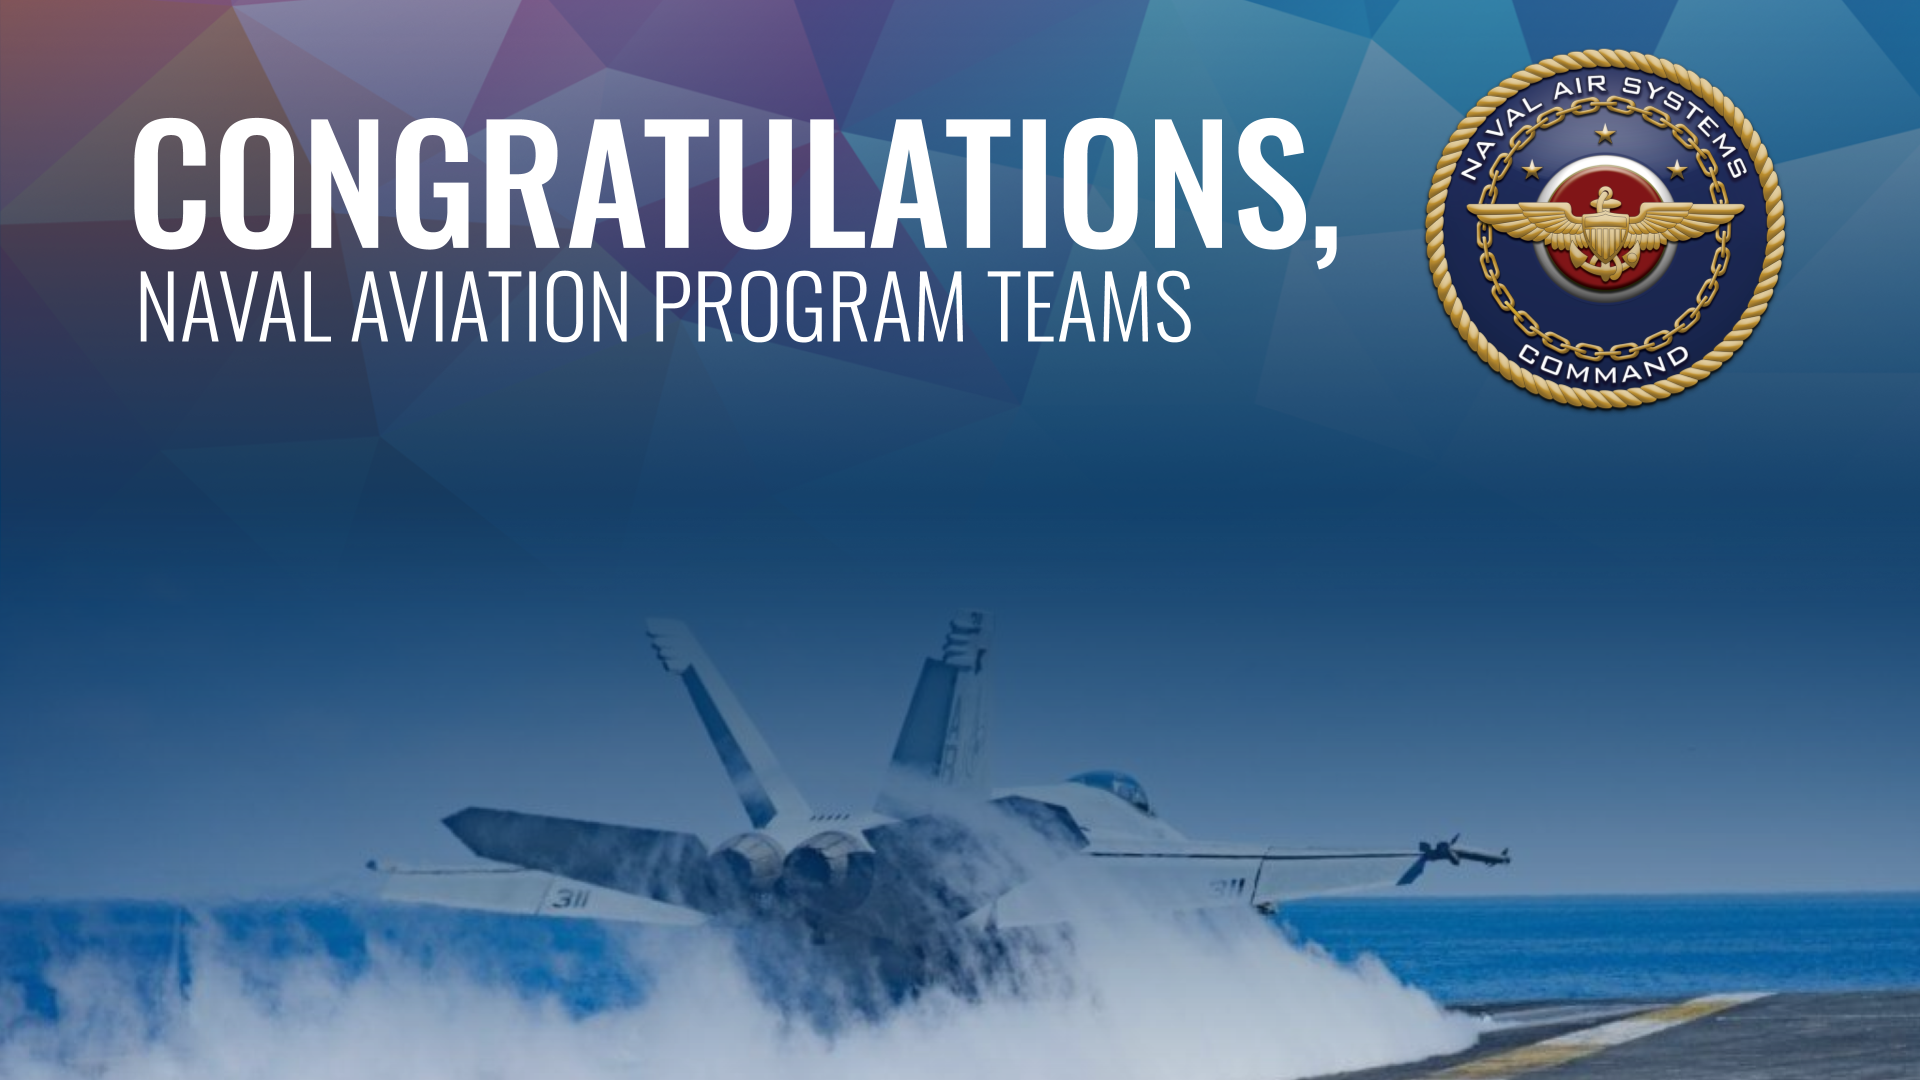 Naval aviation programs win acquisition excellence awards for innovation,  outstanding contributions | NAVAIR